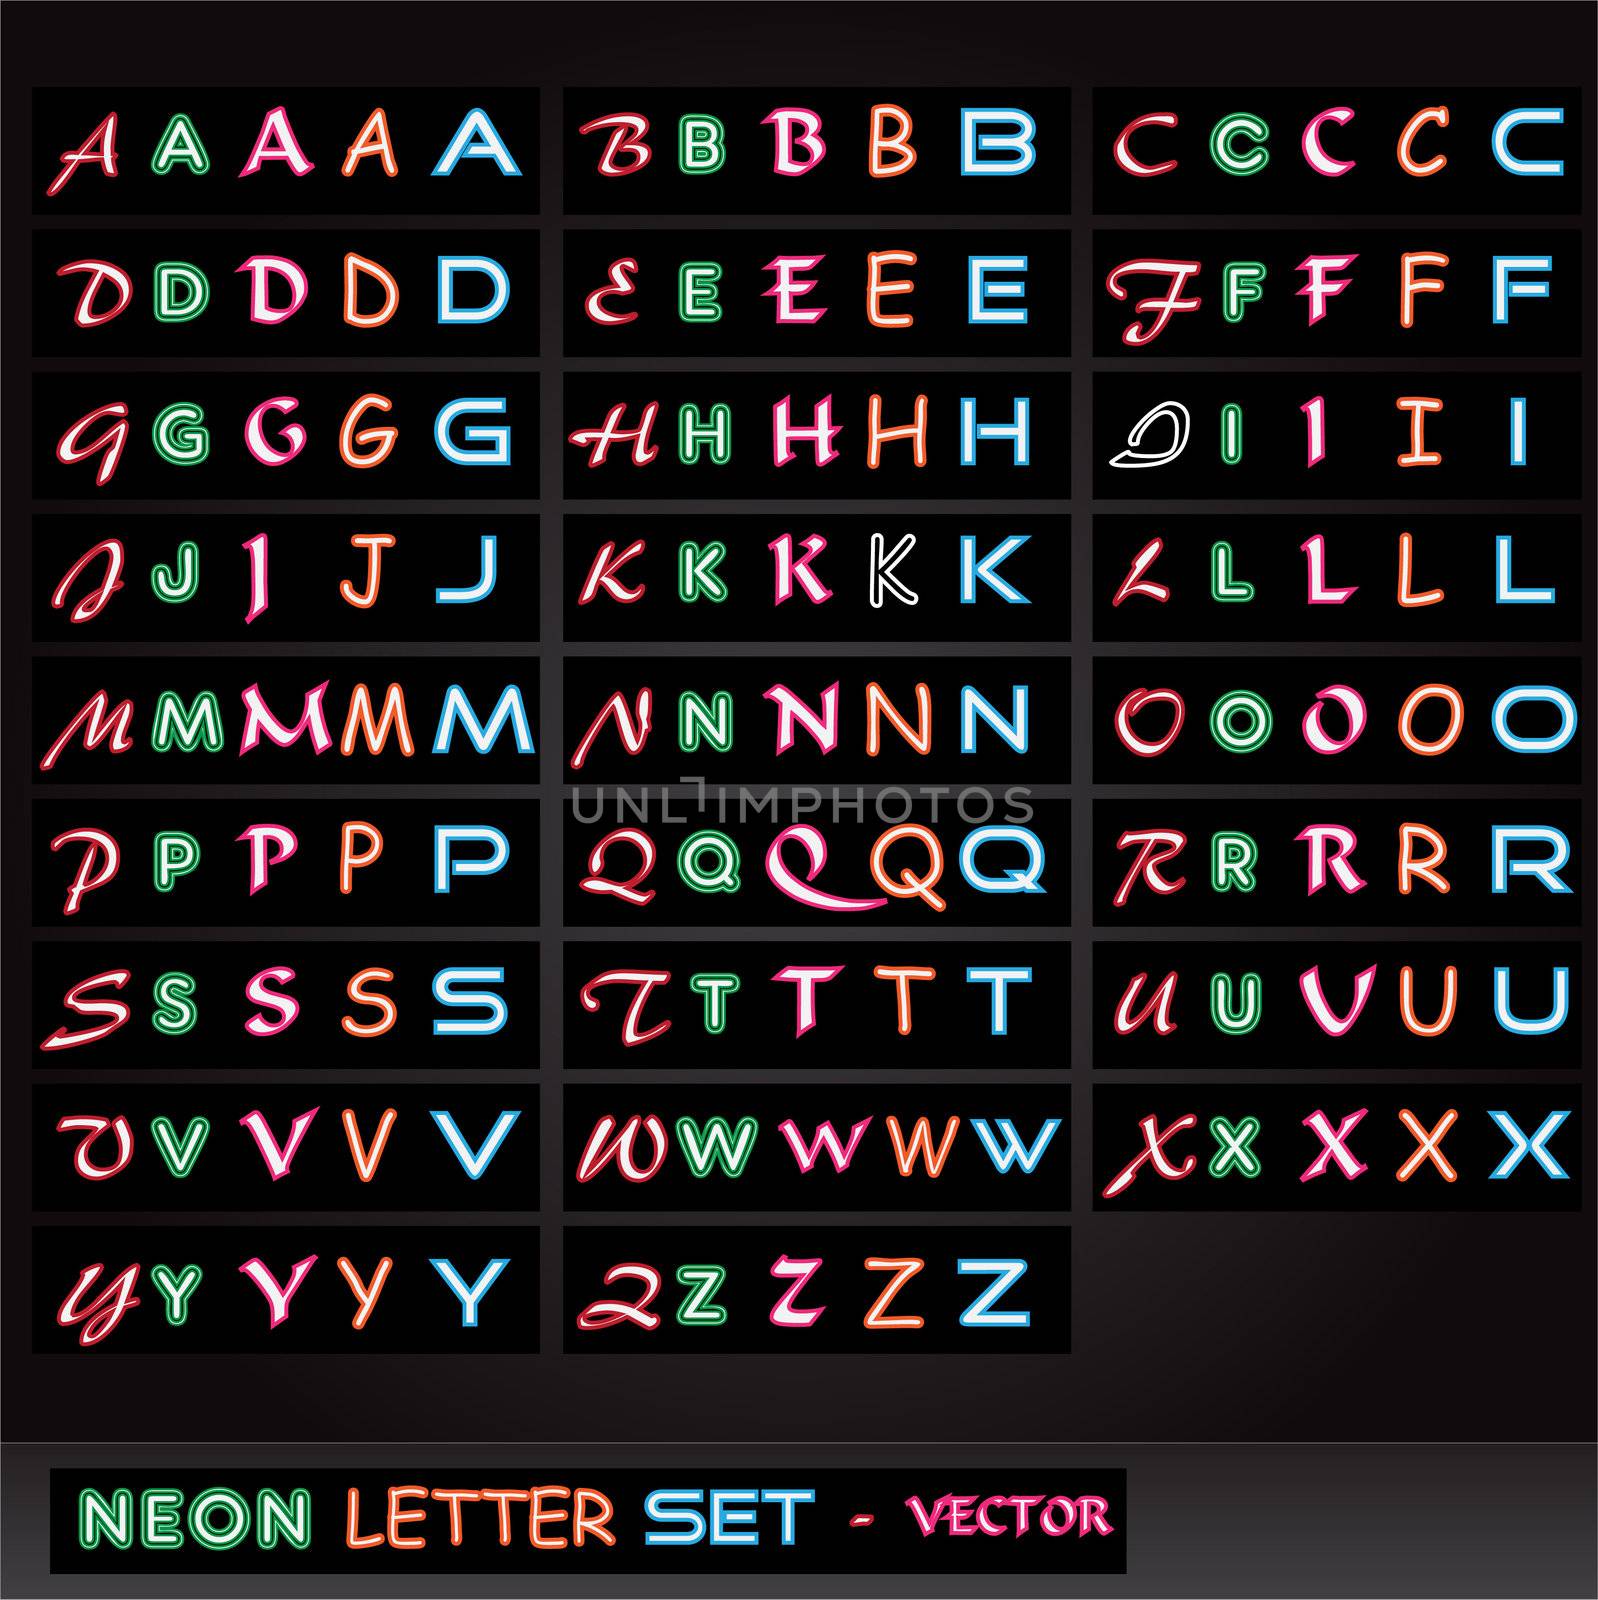 Neon Letter Set by nmarques74